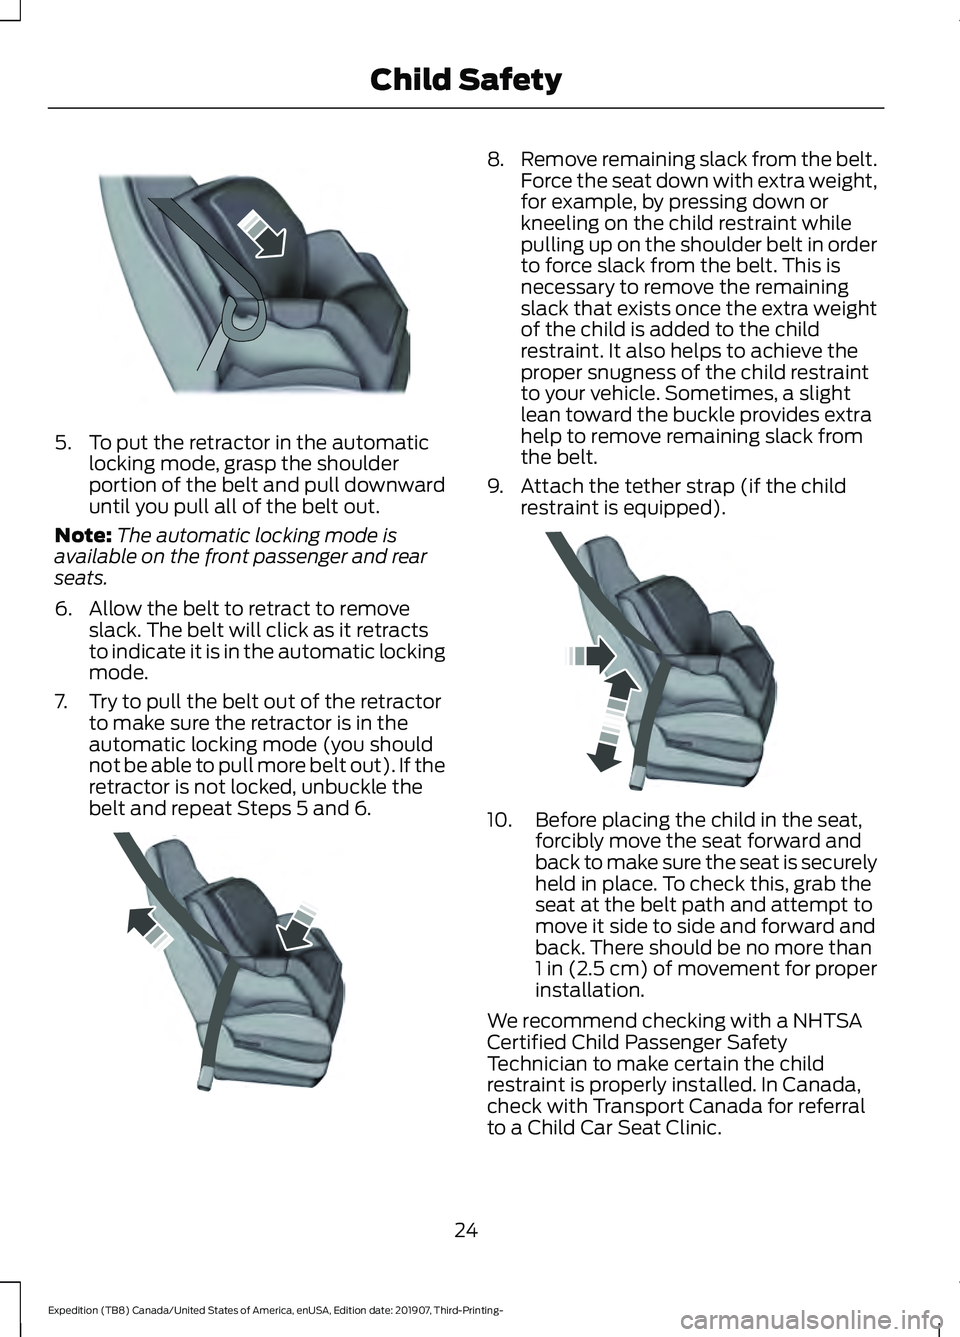 FORD EXPEDITION 2020  Owners Manual 5. To put the retractor in the automatic
locking mode, grasp the shoulder
portion of the belt and pull downward
until you pull all of the belt out.
Note: The automatic locking mode is
available on the